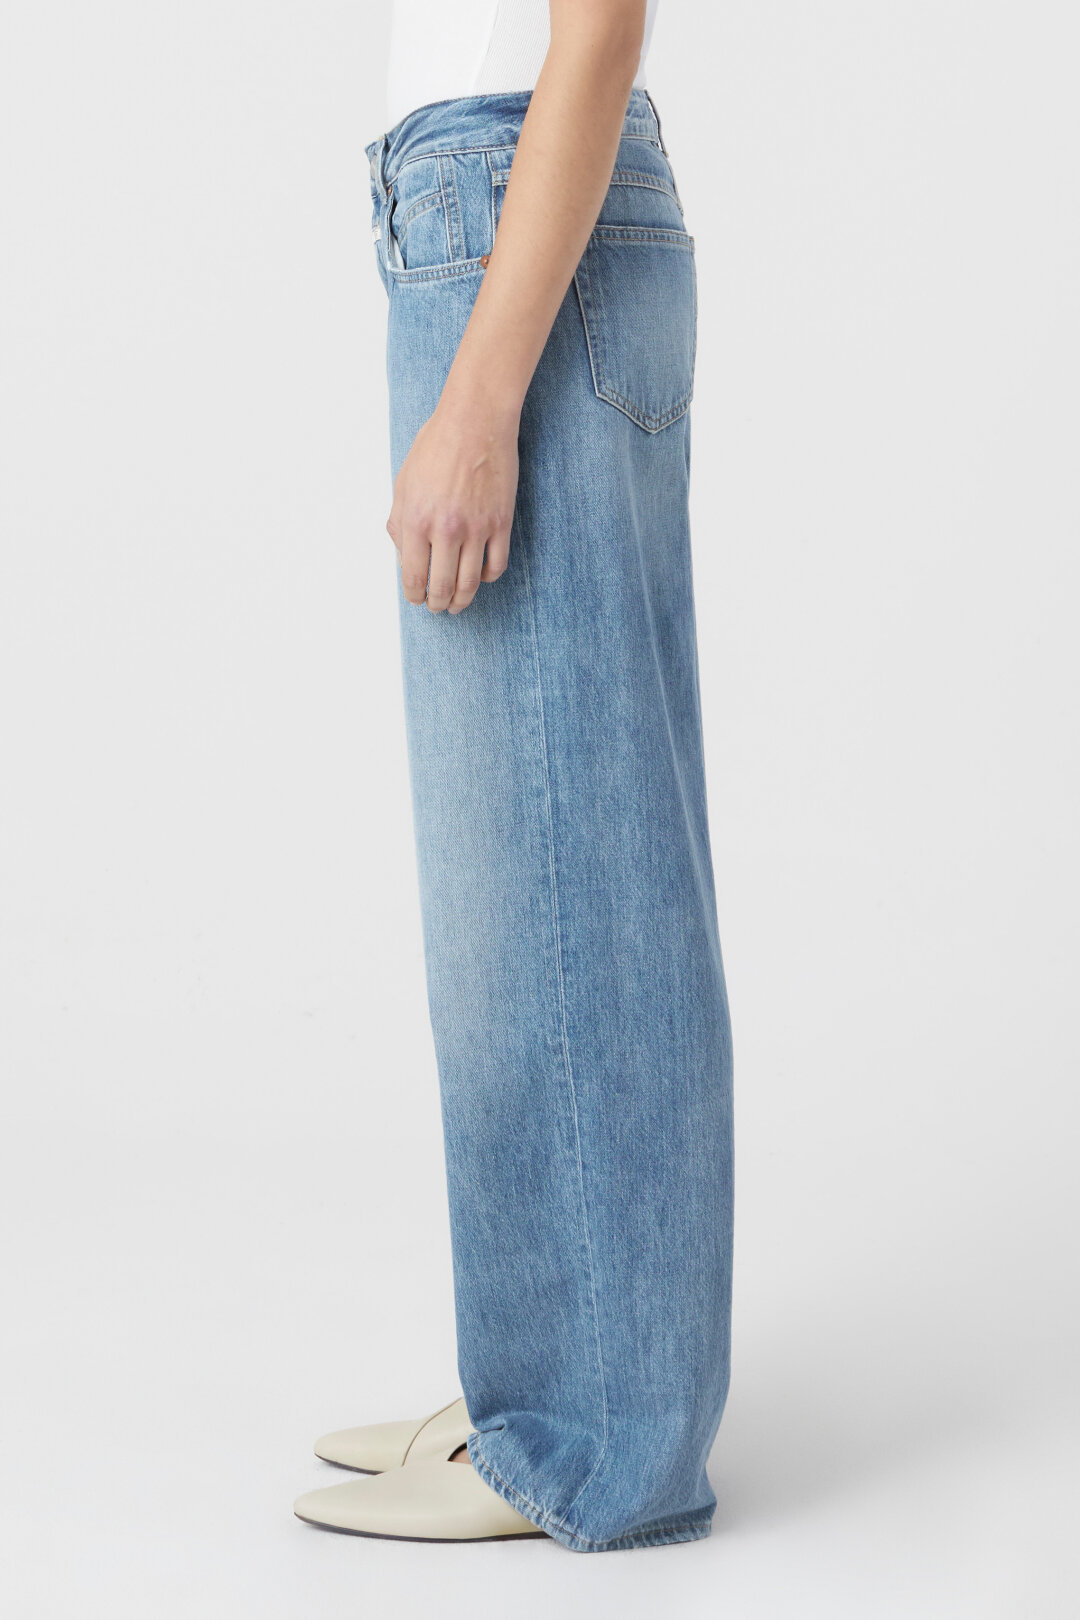 CLOSED Nikka Wide Leg Jeans in Mid Blue Washed